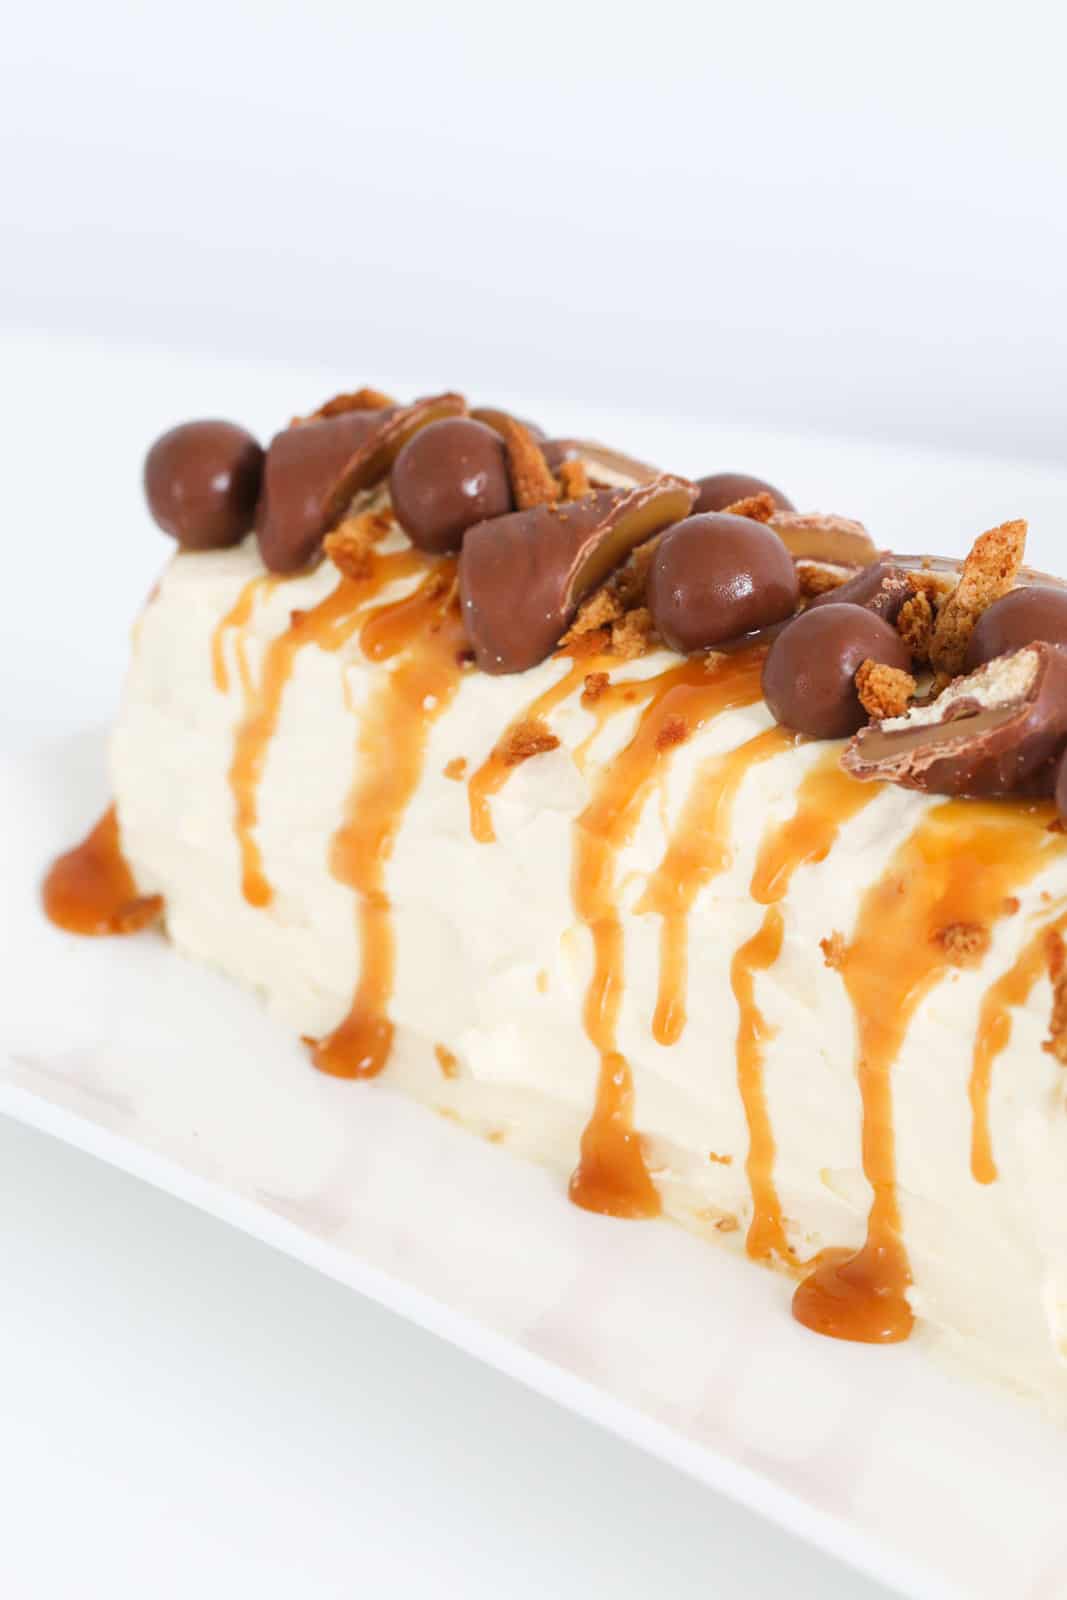 Chocolates and caramel sauce on top of a whipped cream chilled dessert.